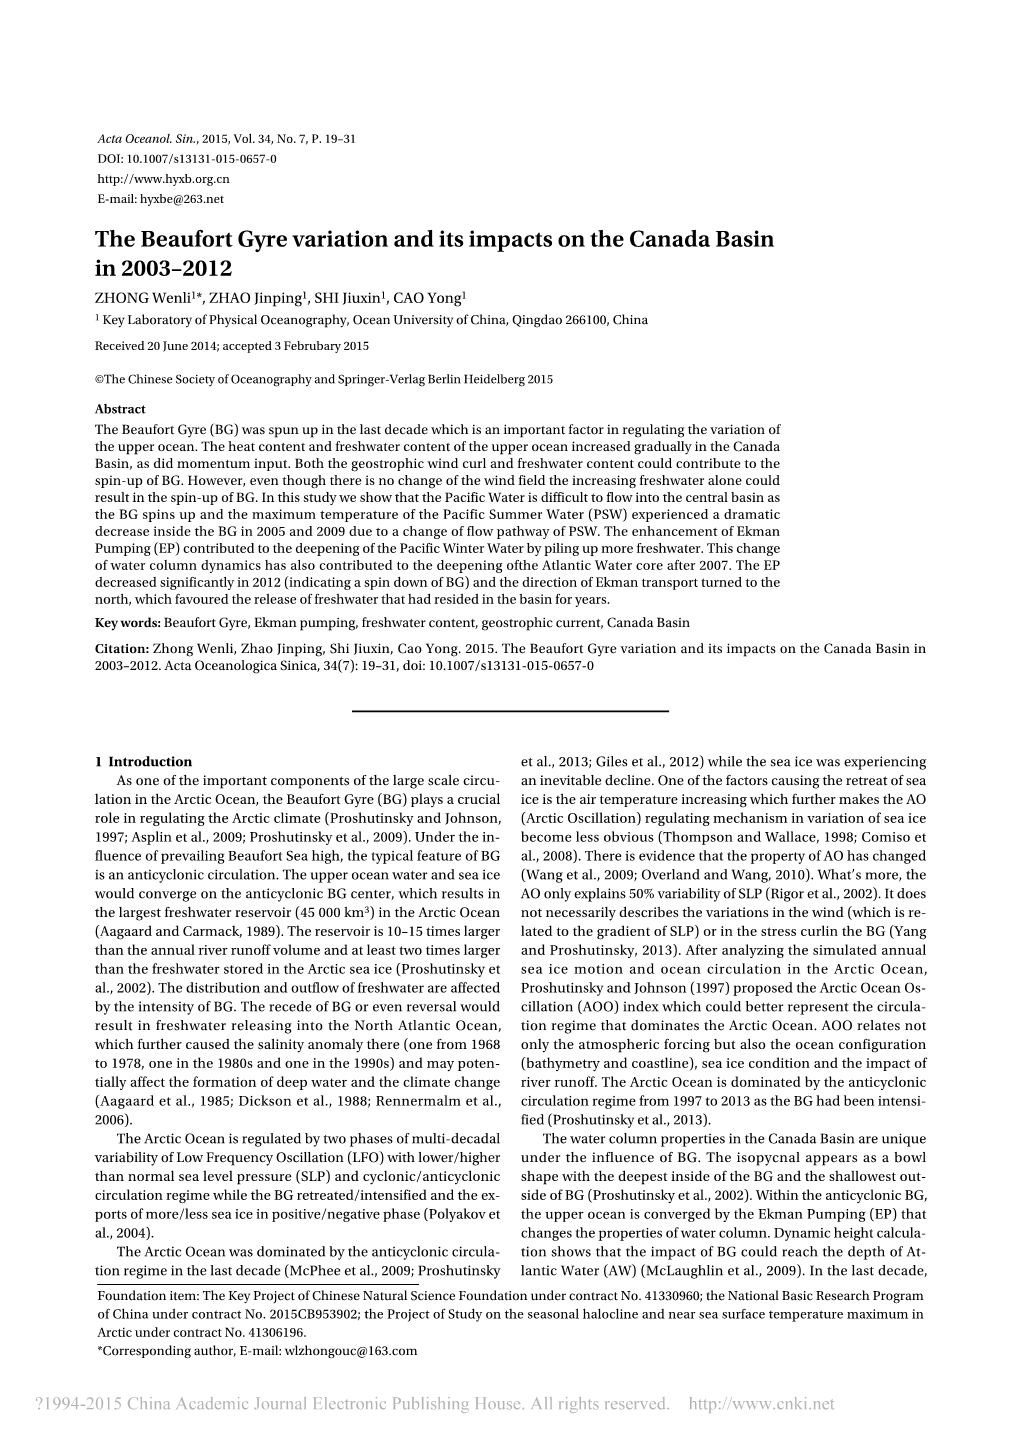 The Beaufort Gyre Variation and Its Impacts on the Canada Basin In